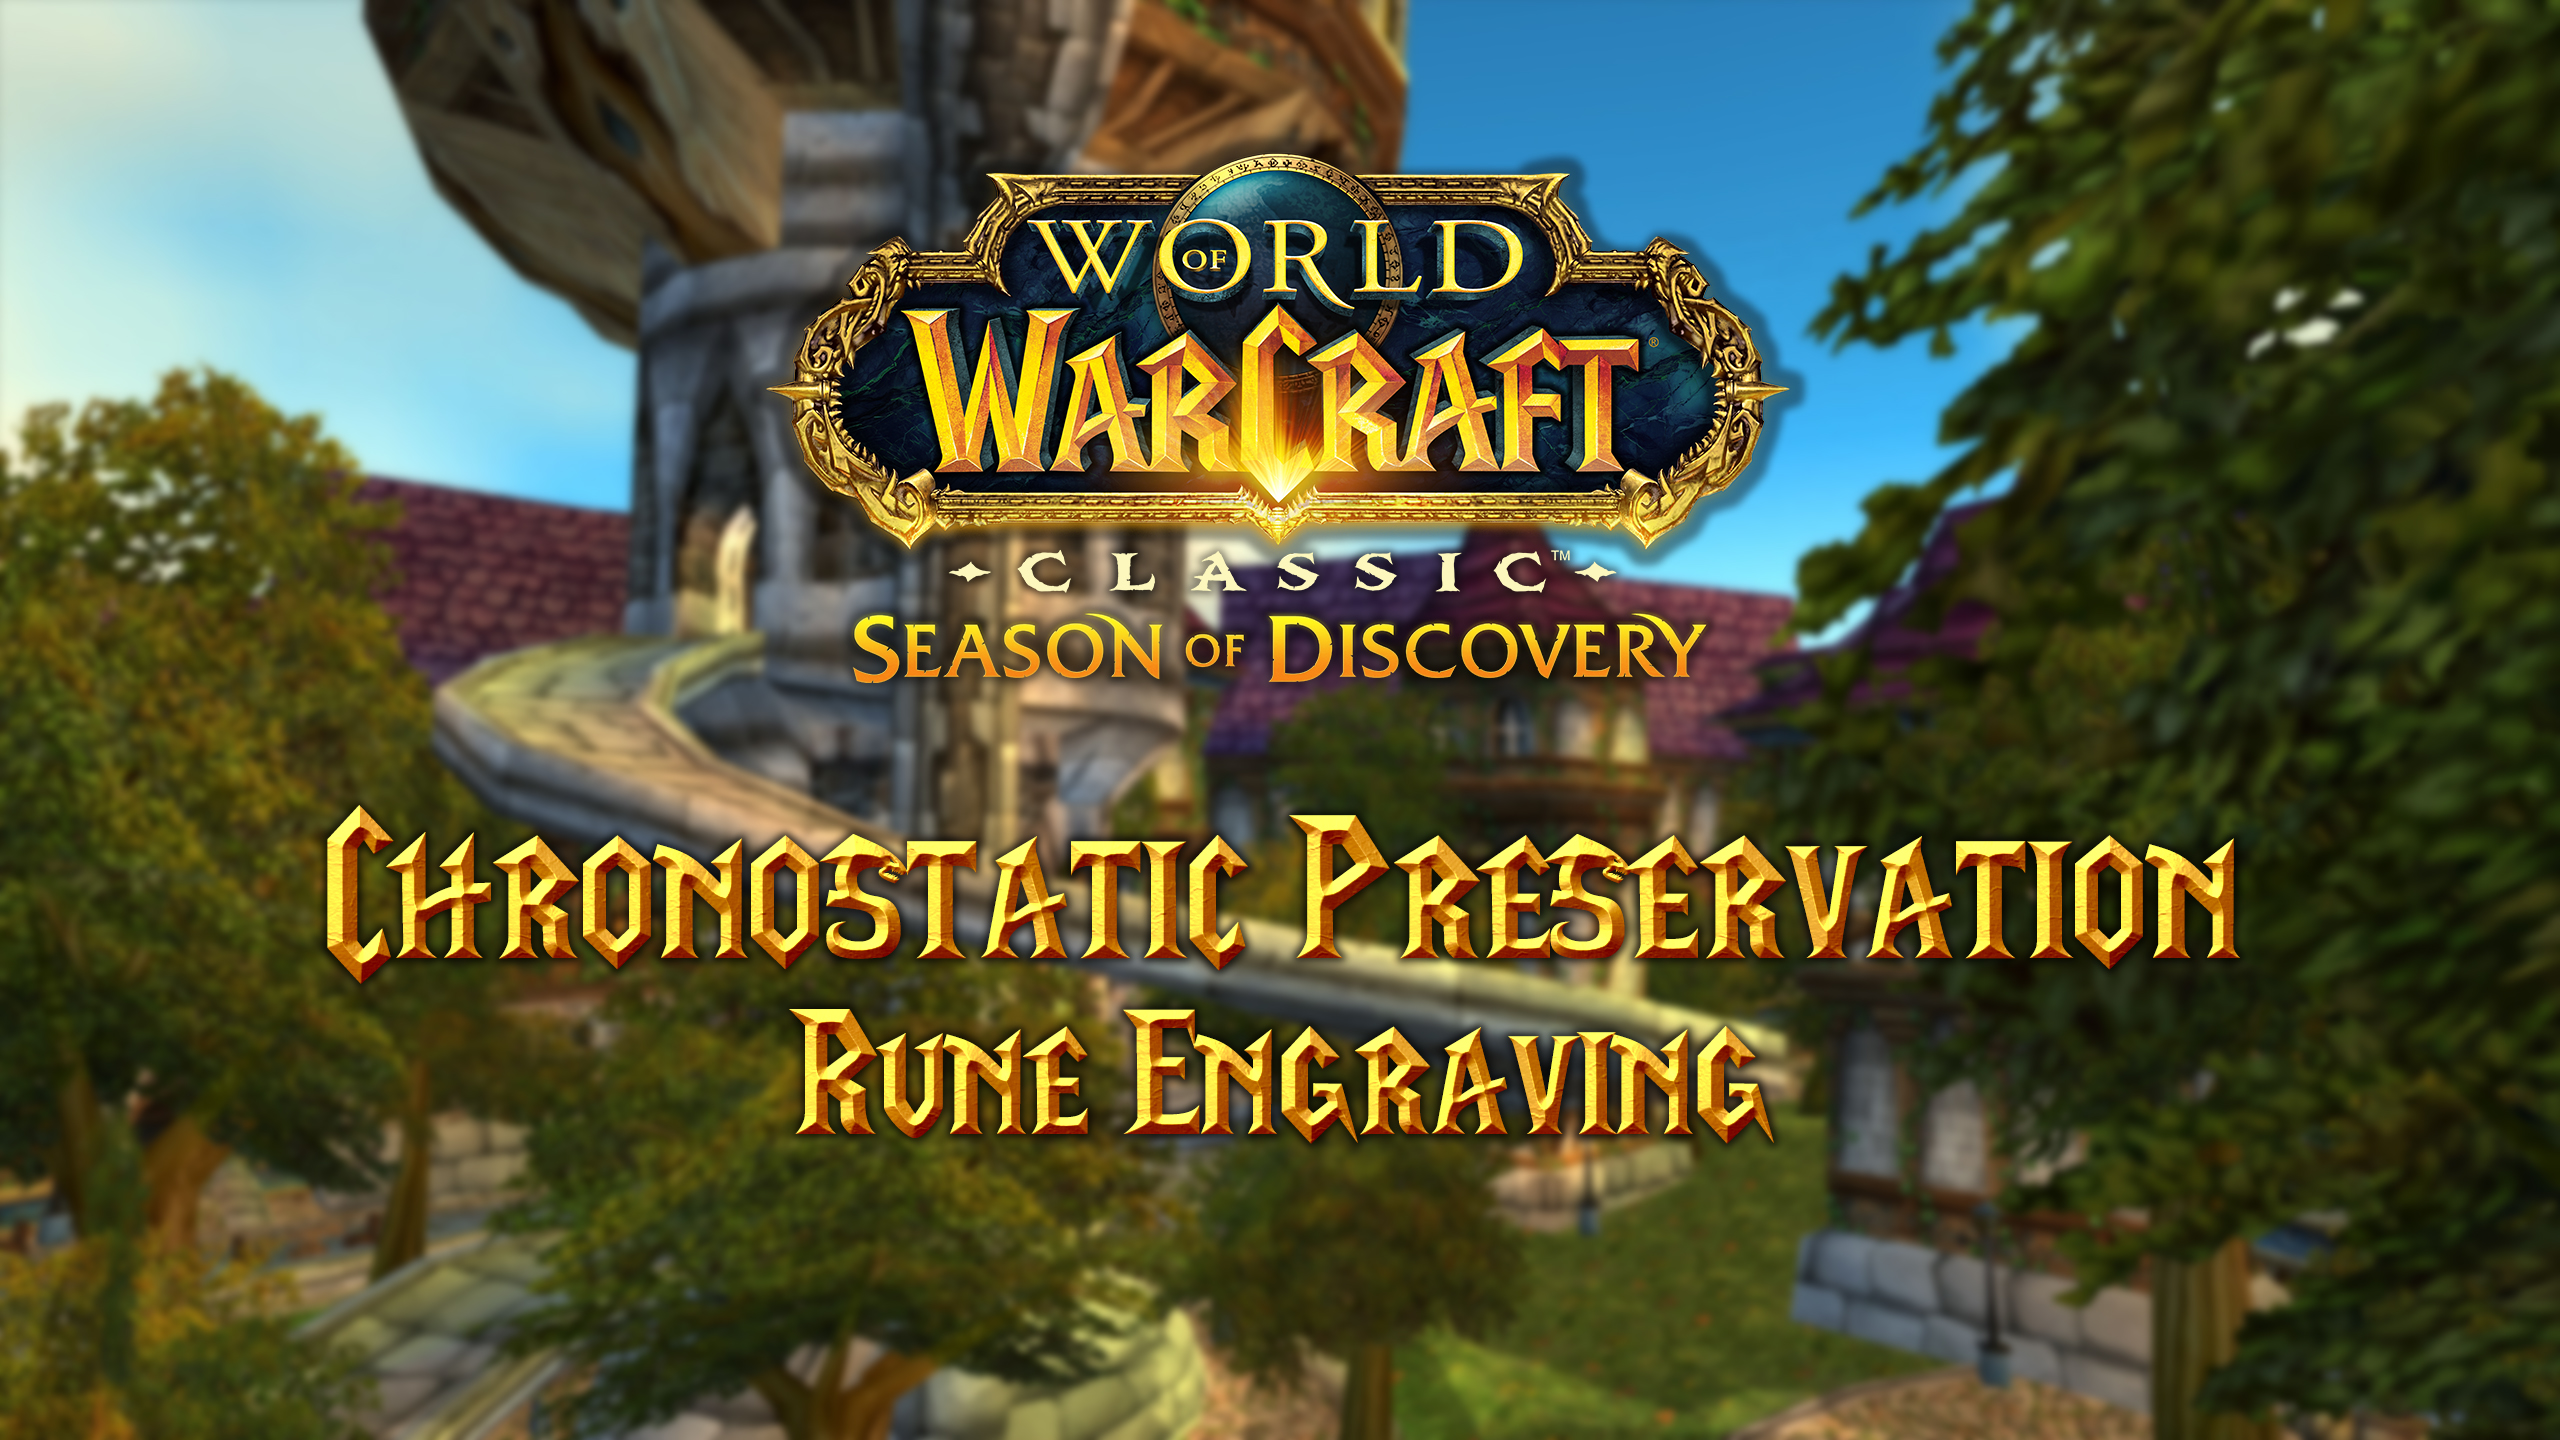 Where to Find the Chronostatic Preservation Rune in Season of Discovery (SoD)